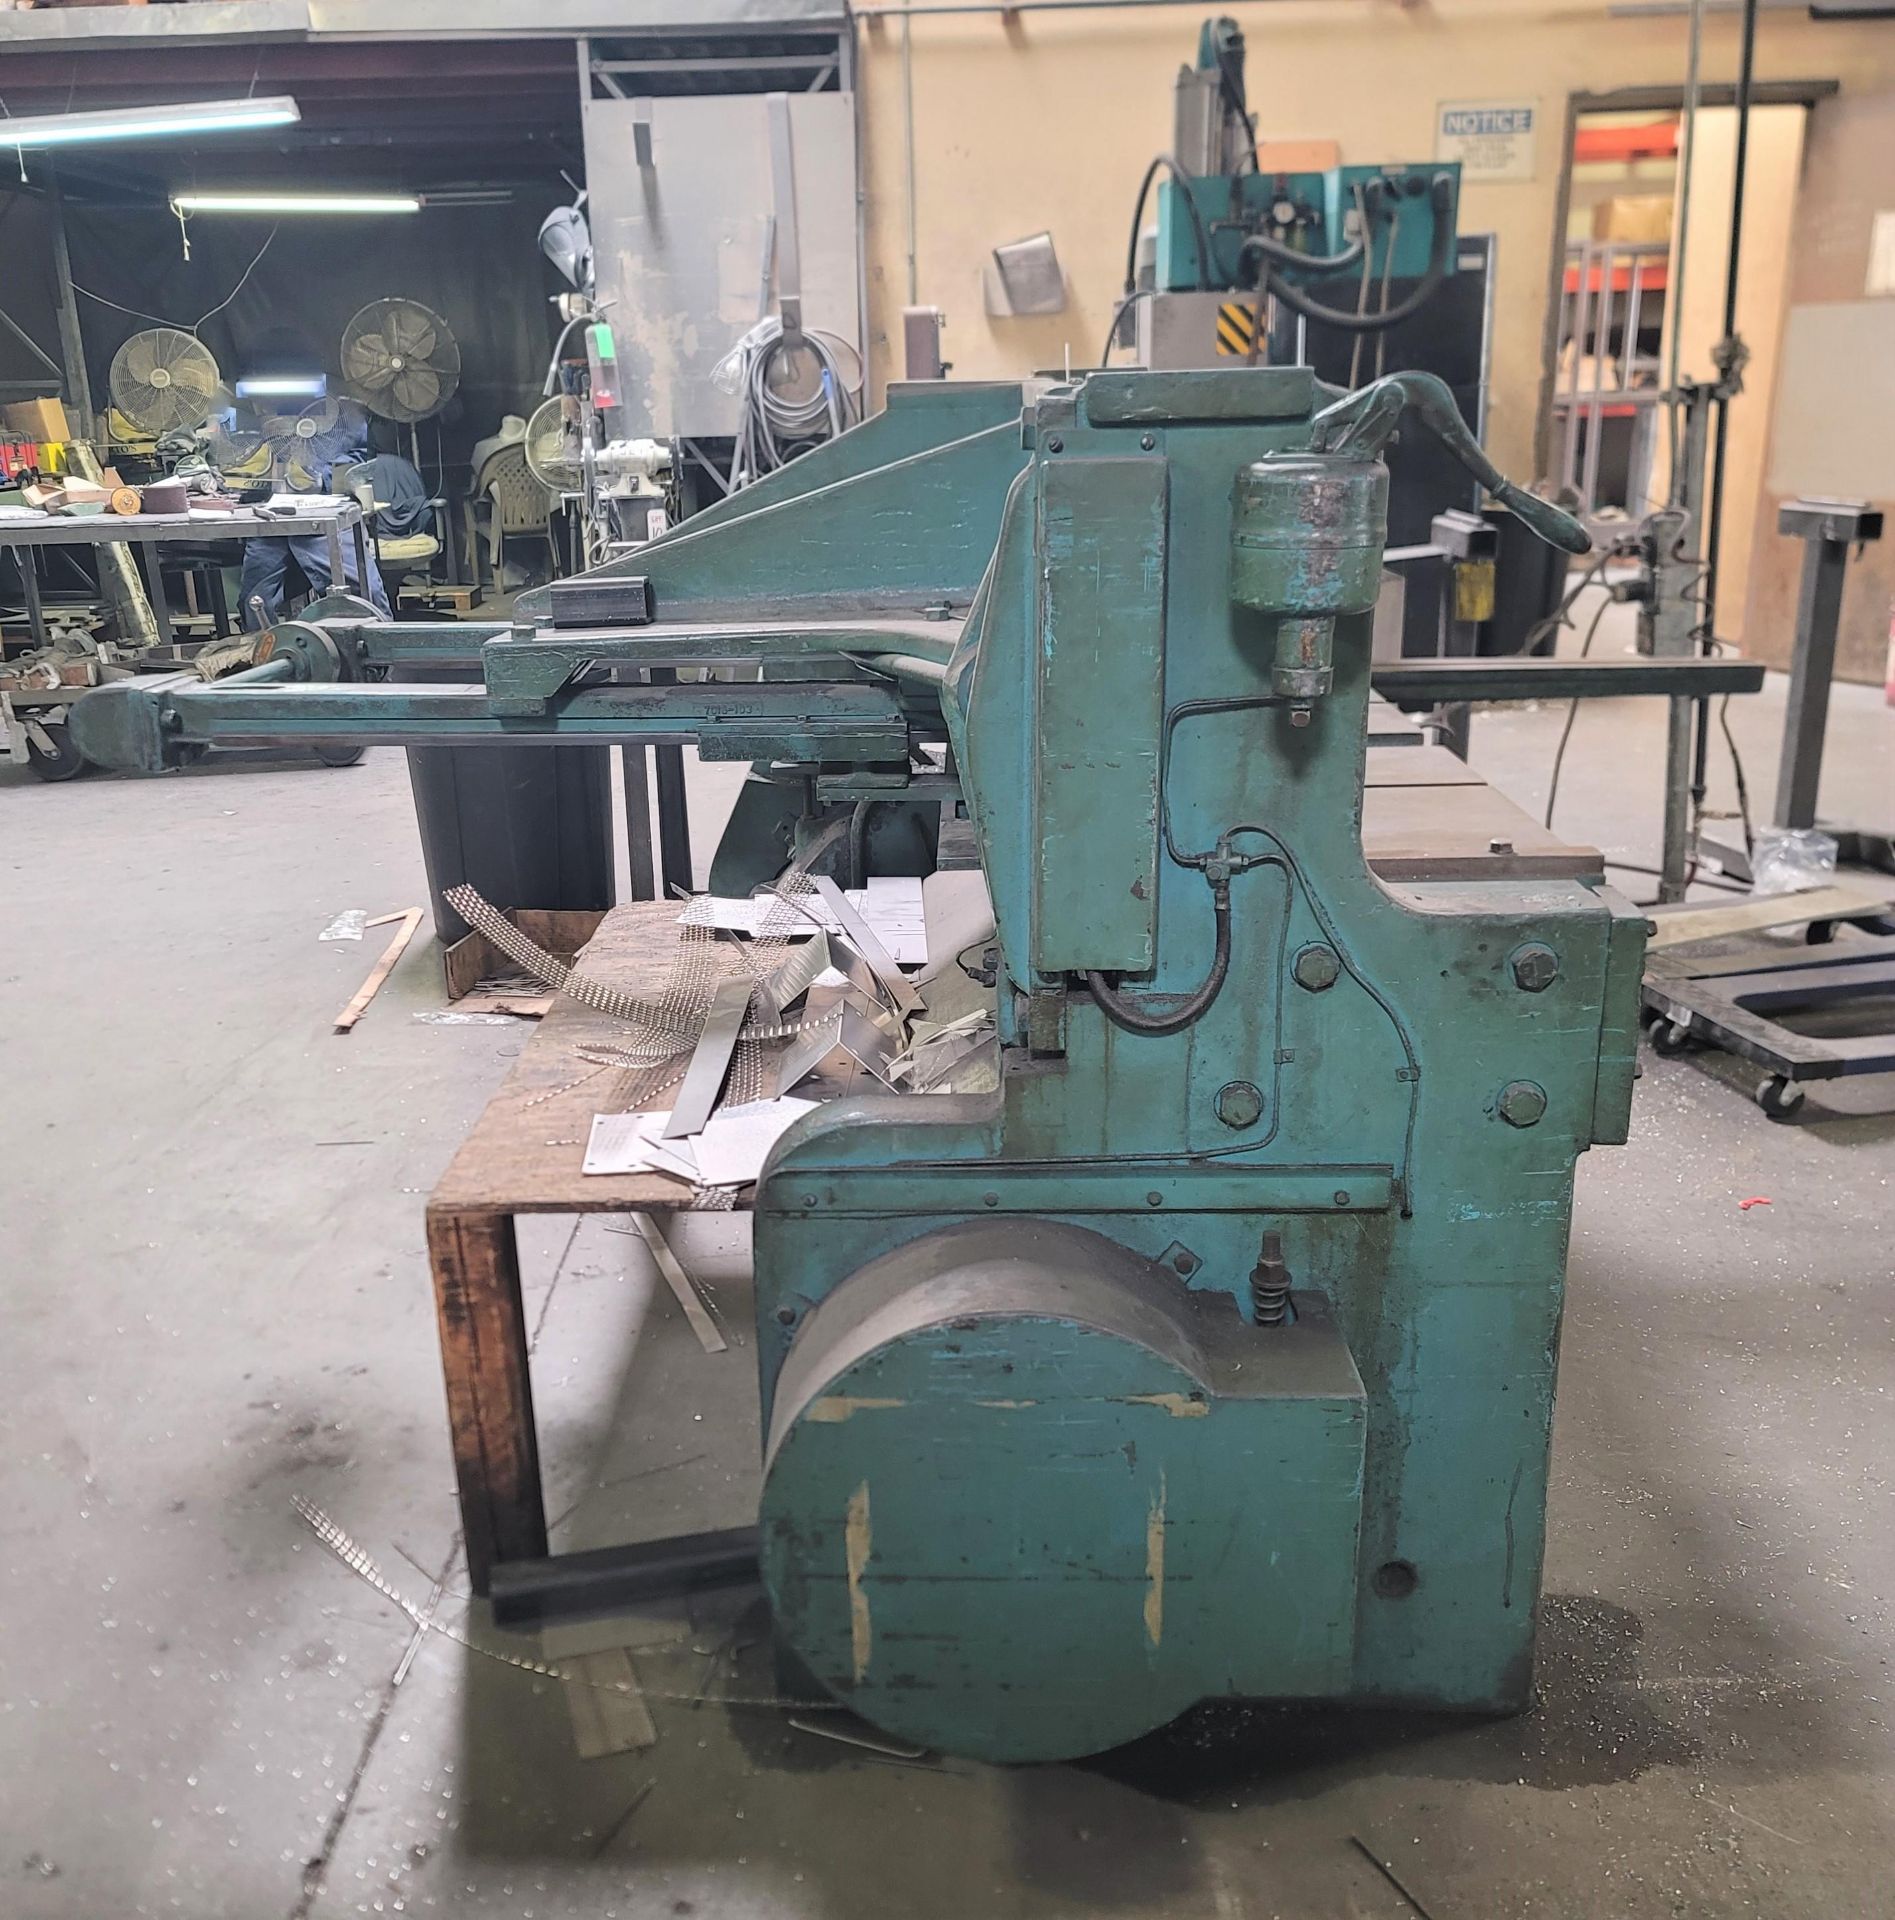 WYSONG 52" POWER SHEAR, MODEL 1252-HD, 10 GAGE X 4' CAPACITY, MECHANICAL, SQUARING ARM, S/N P13- - Image 4 of 5